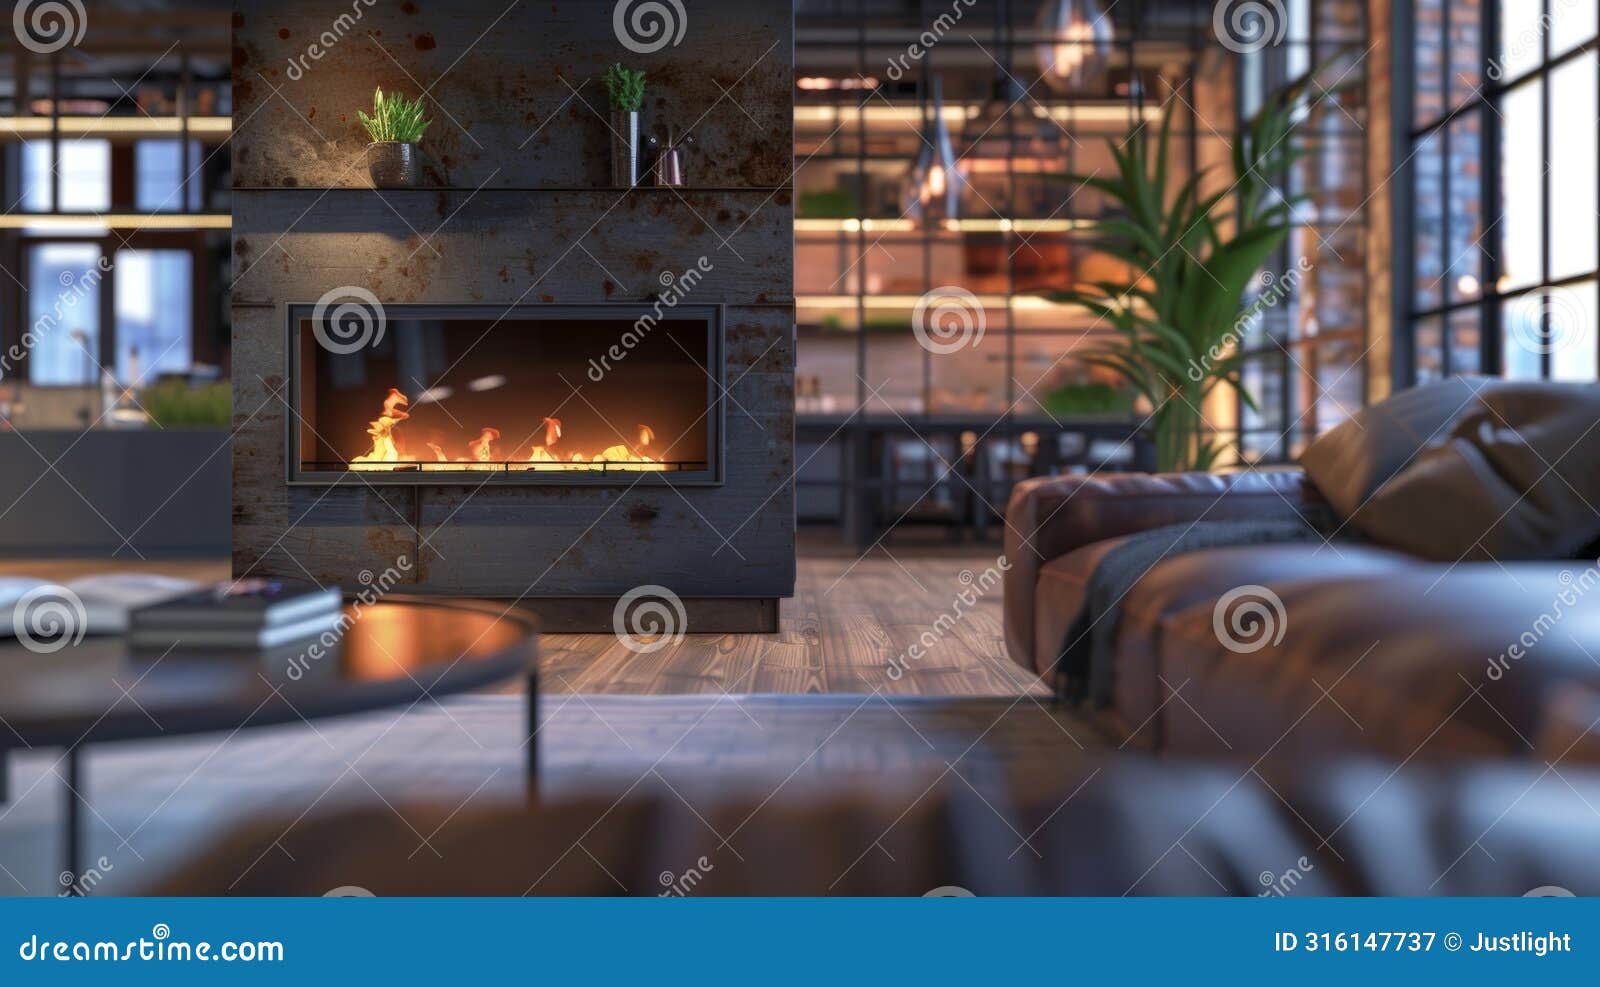 step into this modern industrialstyle loft and be greeted by a remotecontrolled fireplace its flame illuminating the